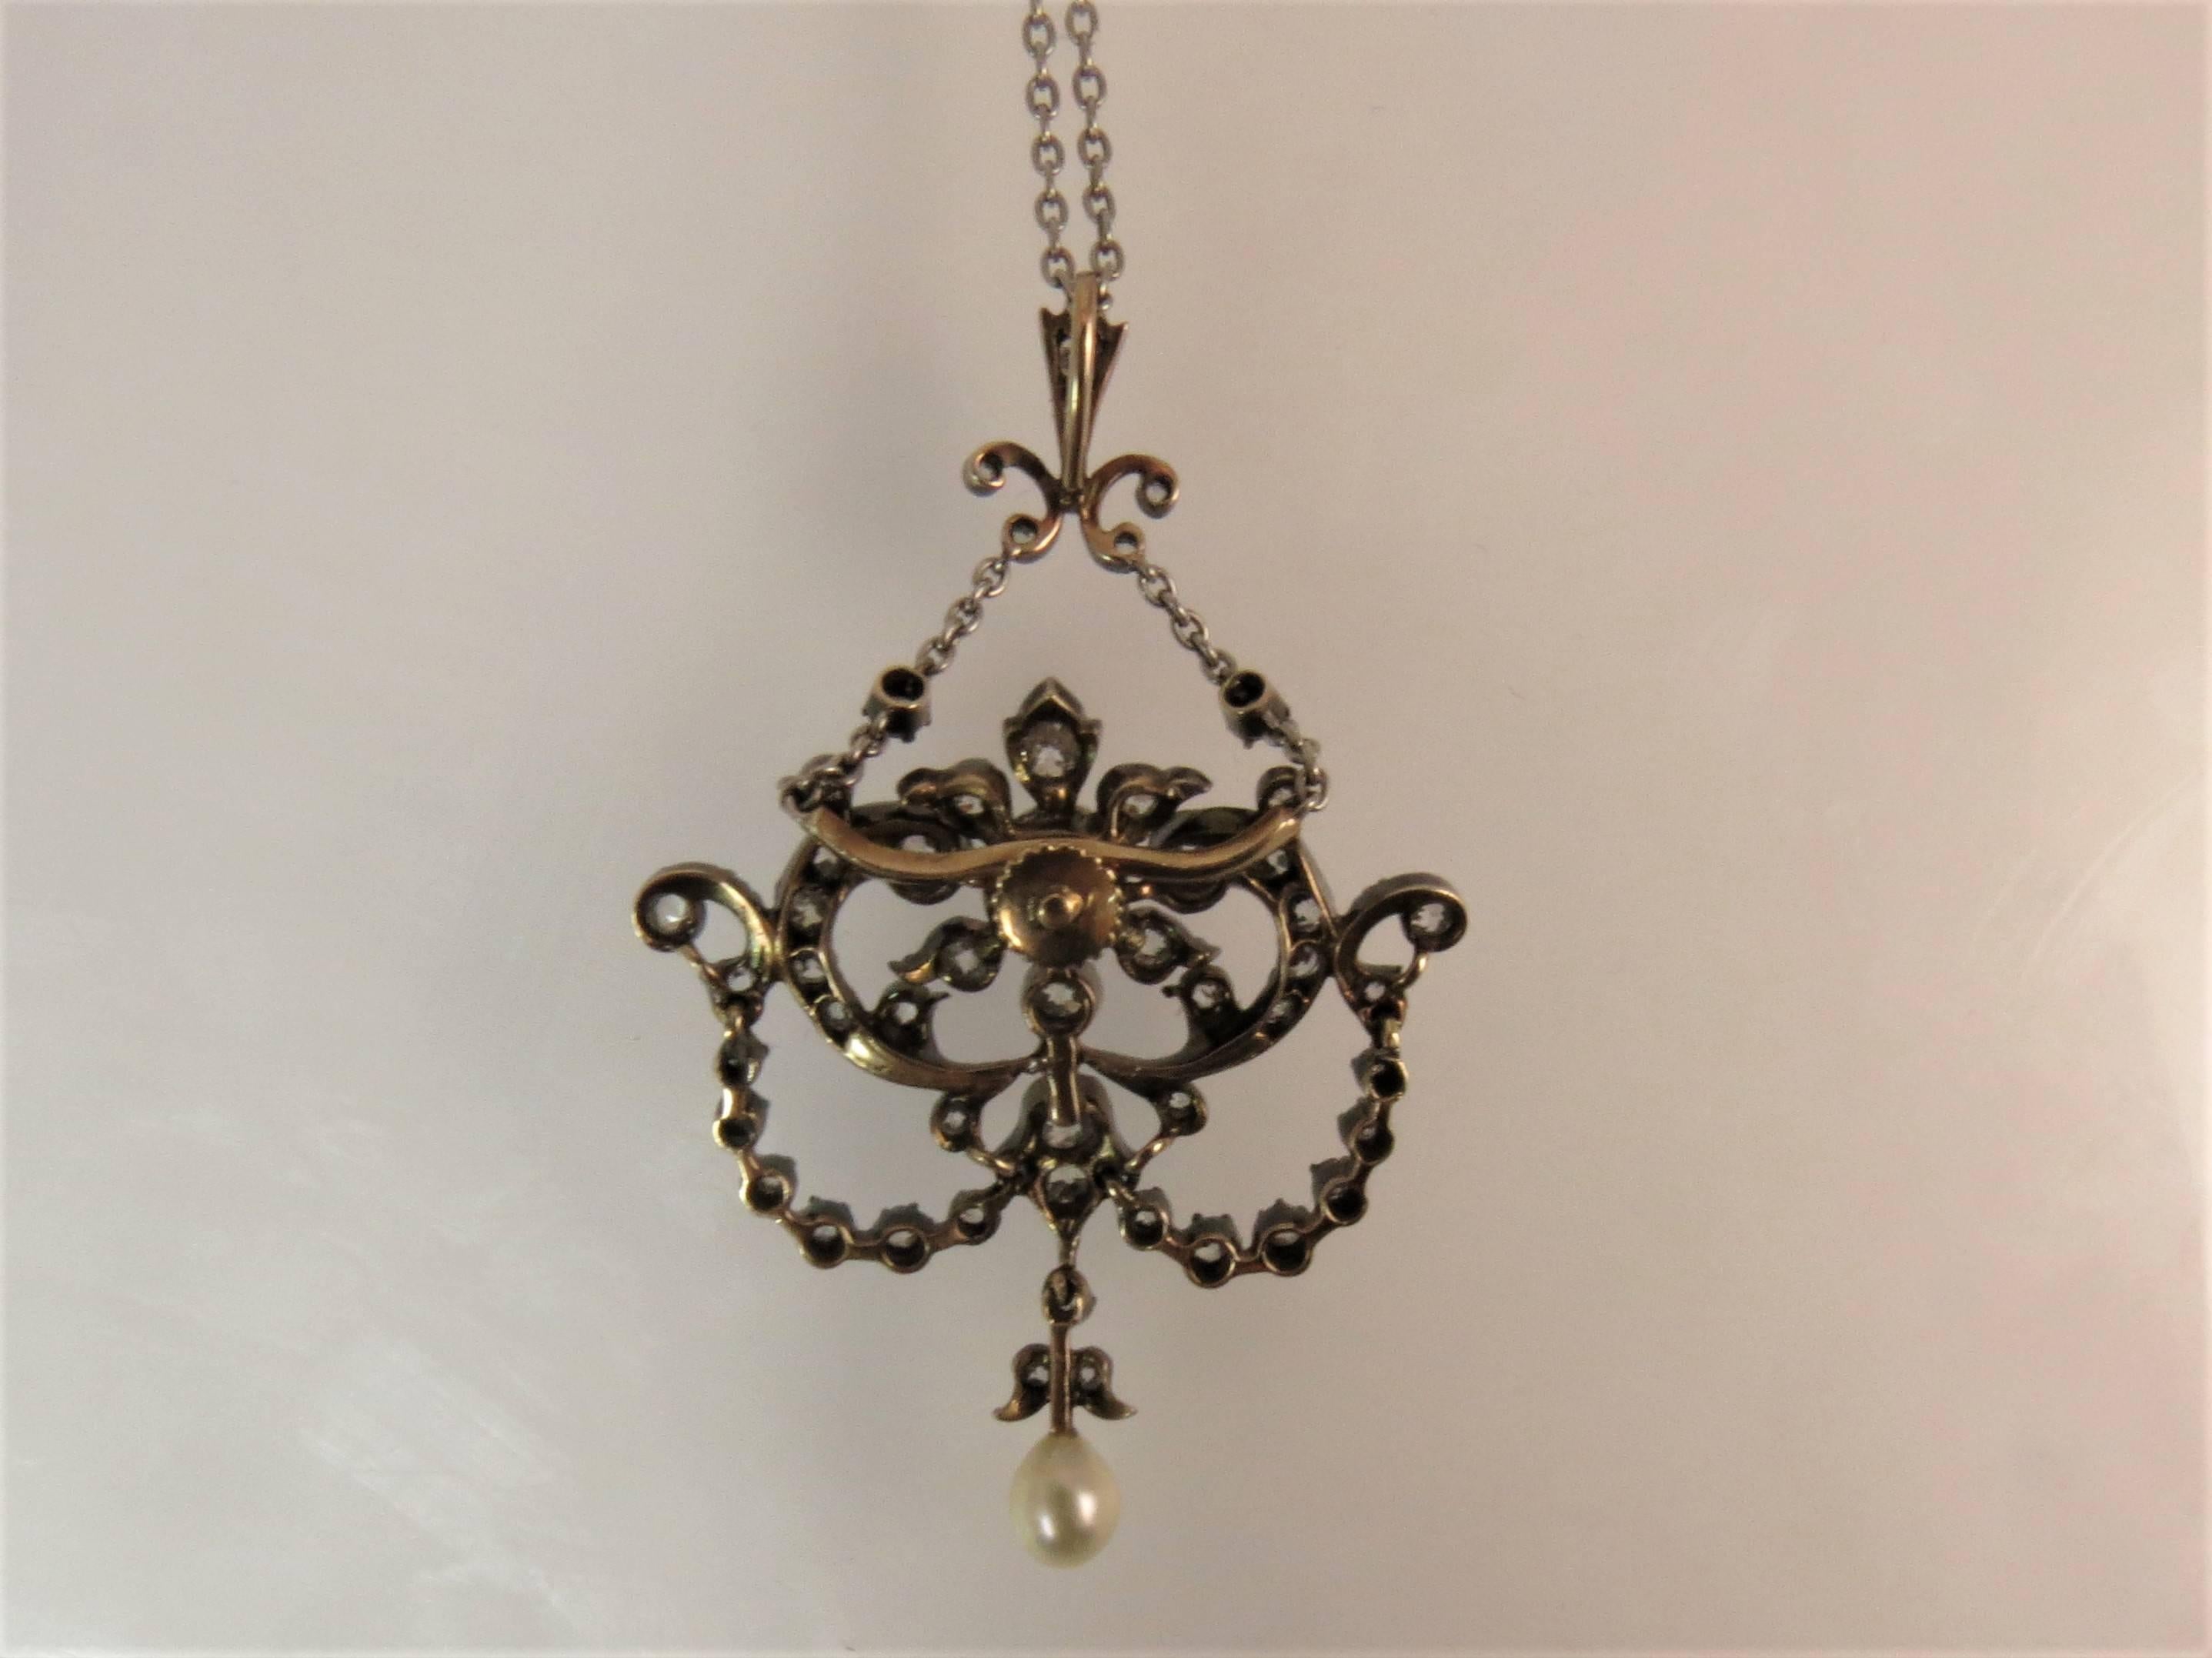 Beautiful Edwardian Pendant, set with 51 old European cut diamonds weighing approximately 1.25cts, H-I color, VS clarity and two natural pearls, center pearl  5mm and tear drop pearl 5.4mm x 4.3mm, measuring 1.13 x 1.75 inches total suspended from